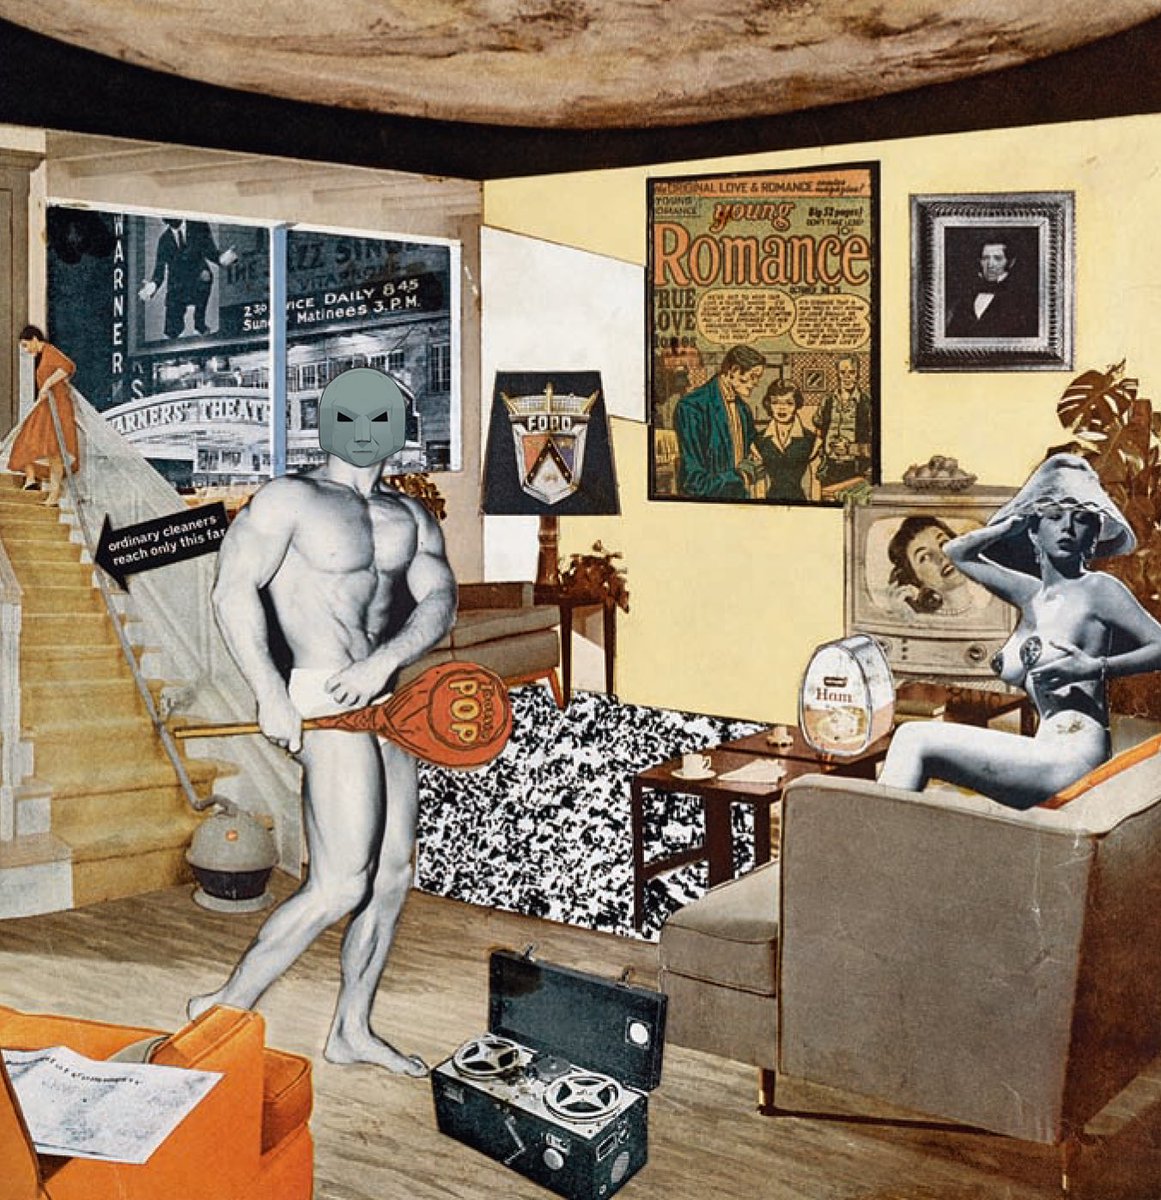 We have always been here. Richard Hamilton JUST WHAT IS IT THAT MAKES TODAY’S HOMES SO DIFFERENT, SO APPEALING? 1956 #solanonhistory